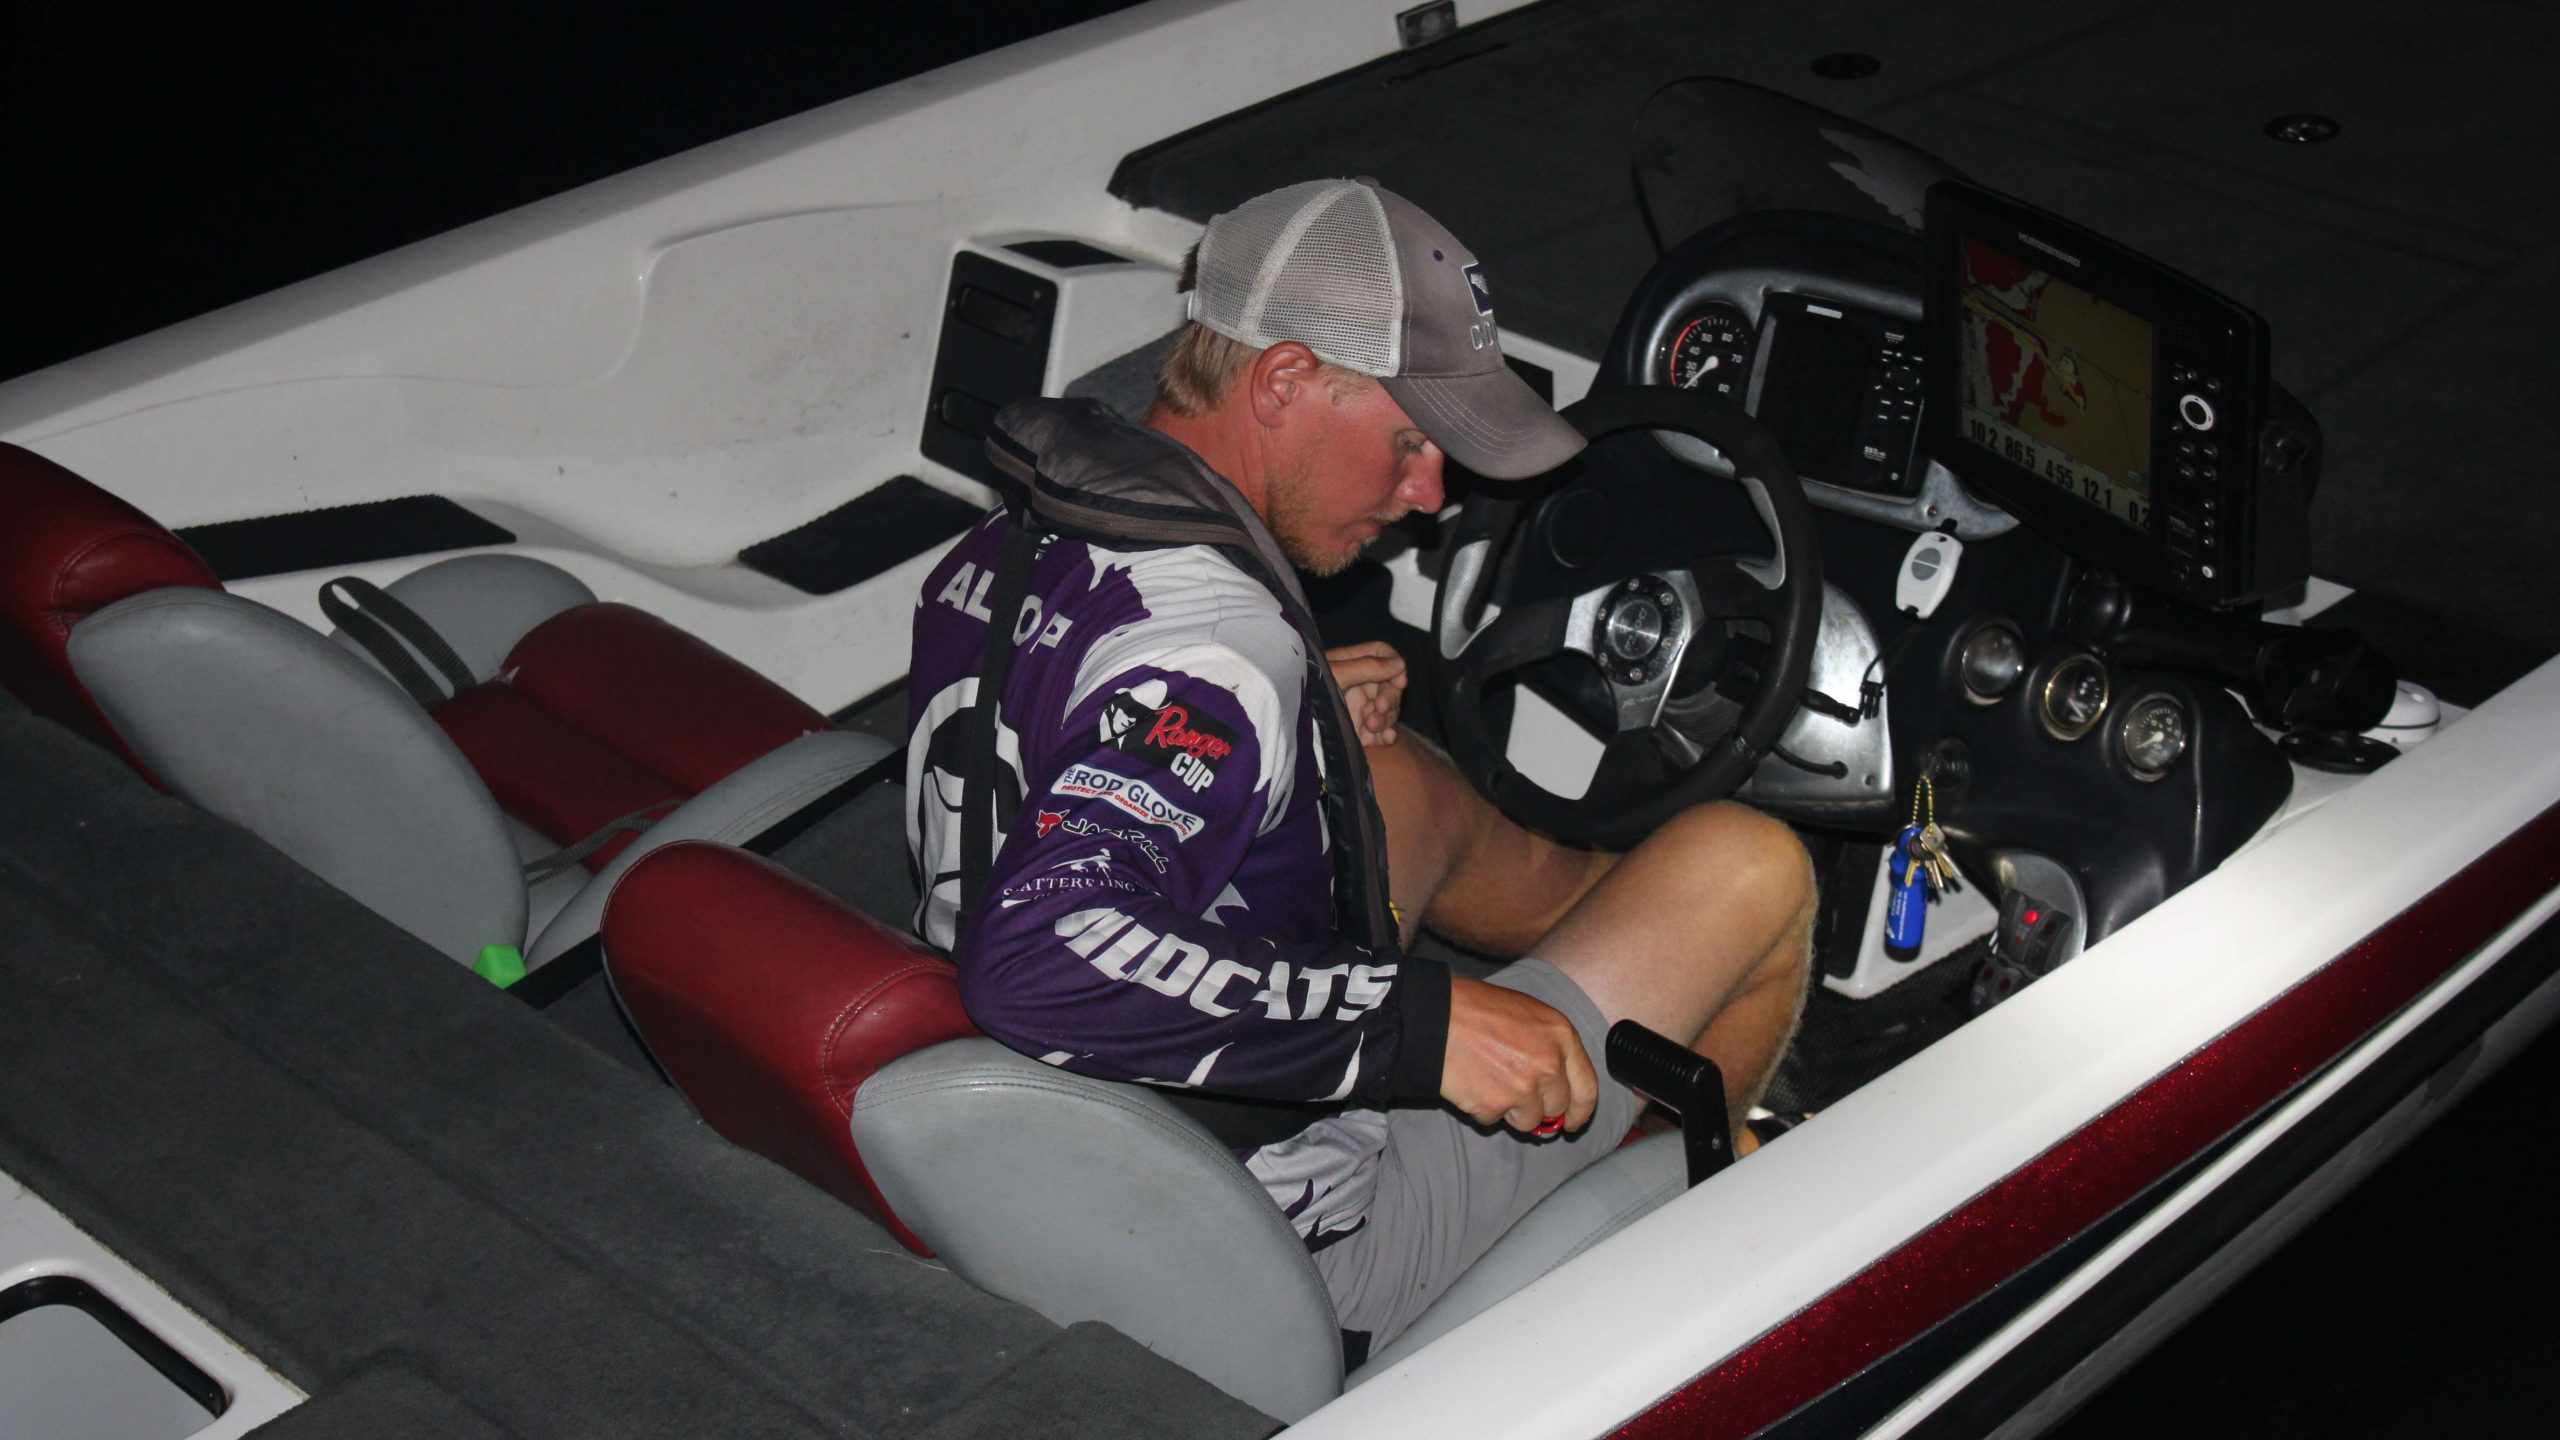 Kansas State angler Kyle Alsop, the No 1 seed in this event, was the first of the four remaining anglers to line up Friday morning.